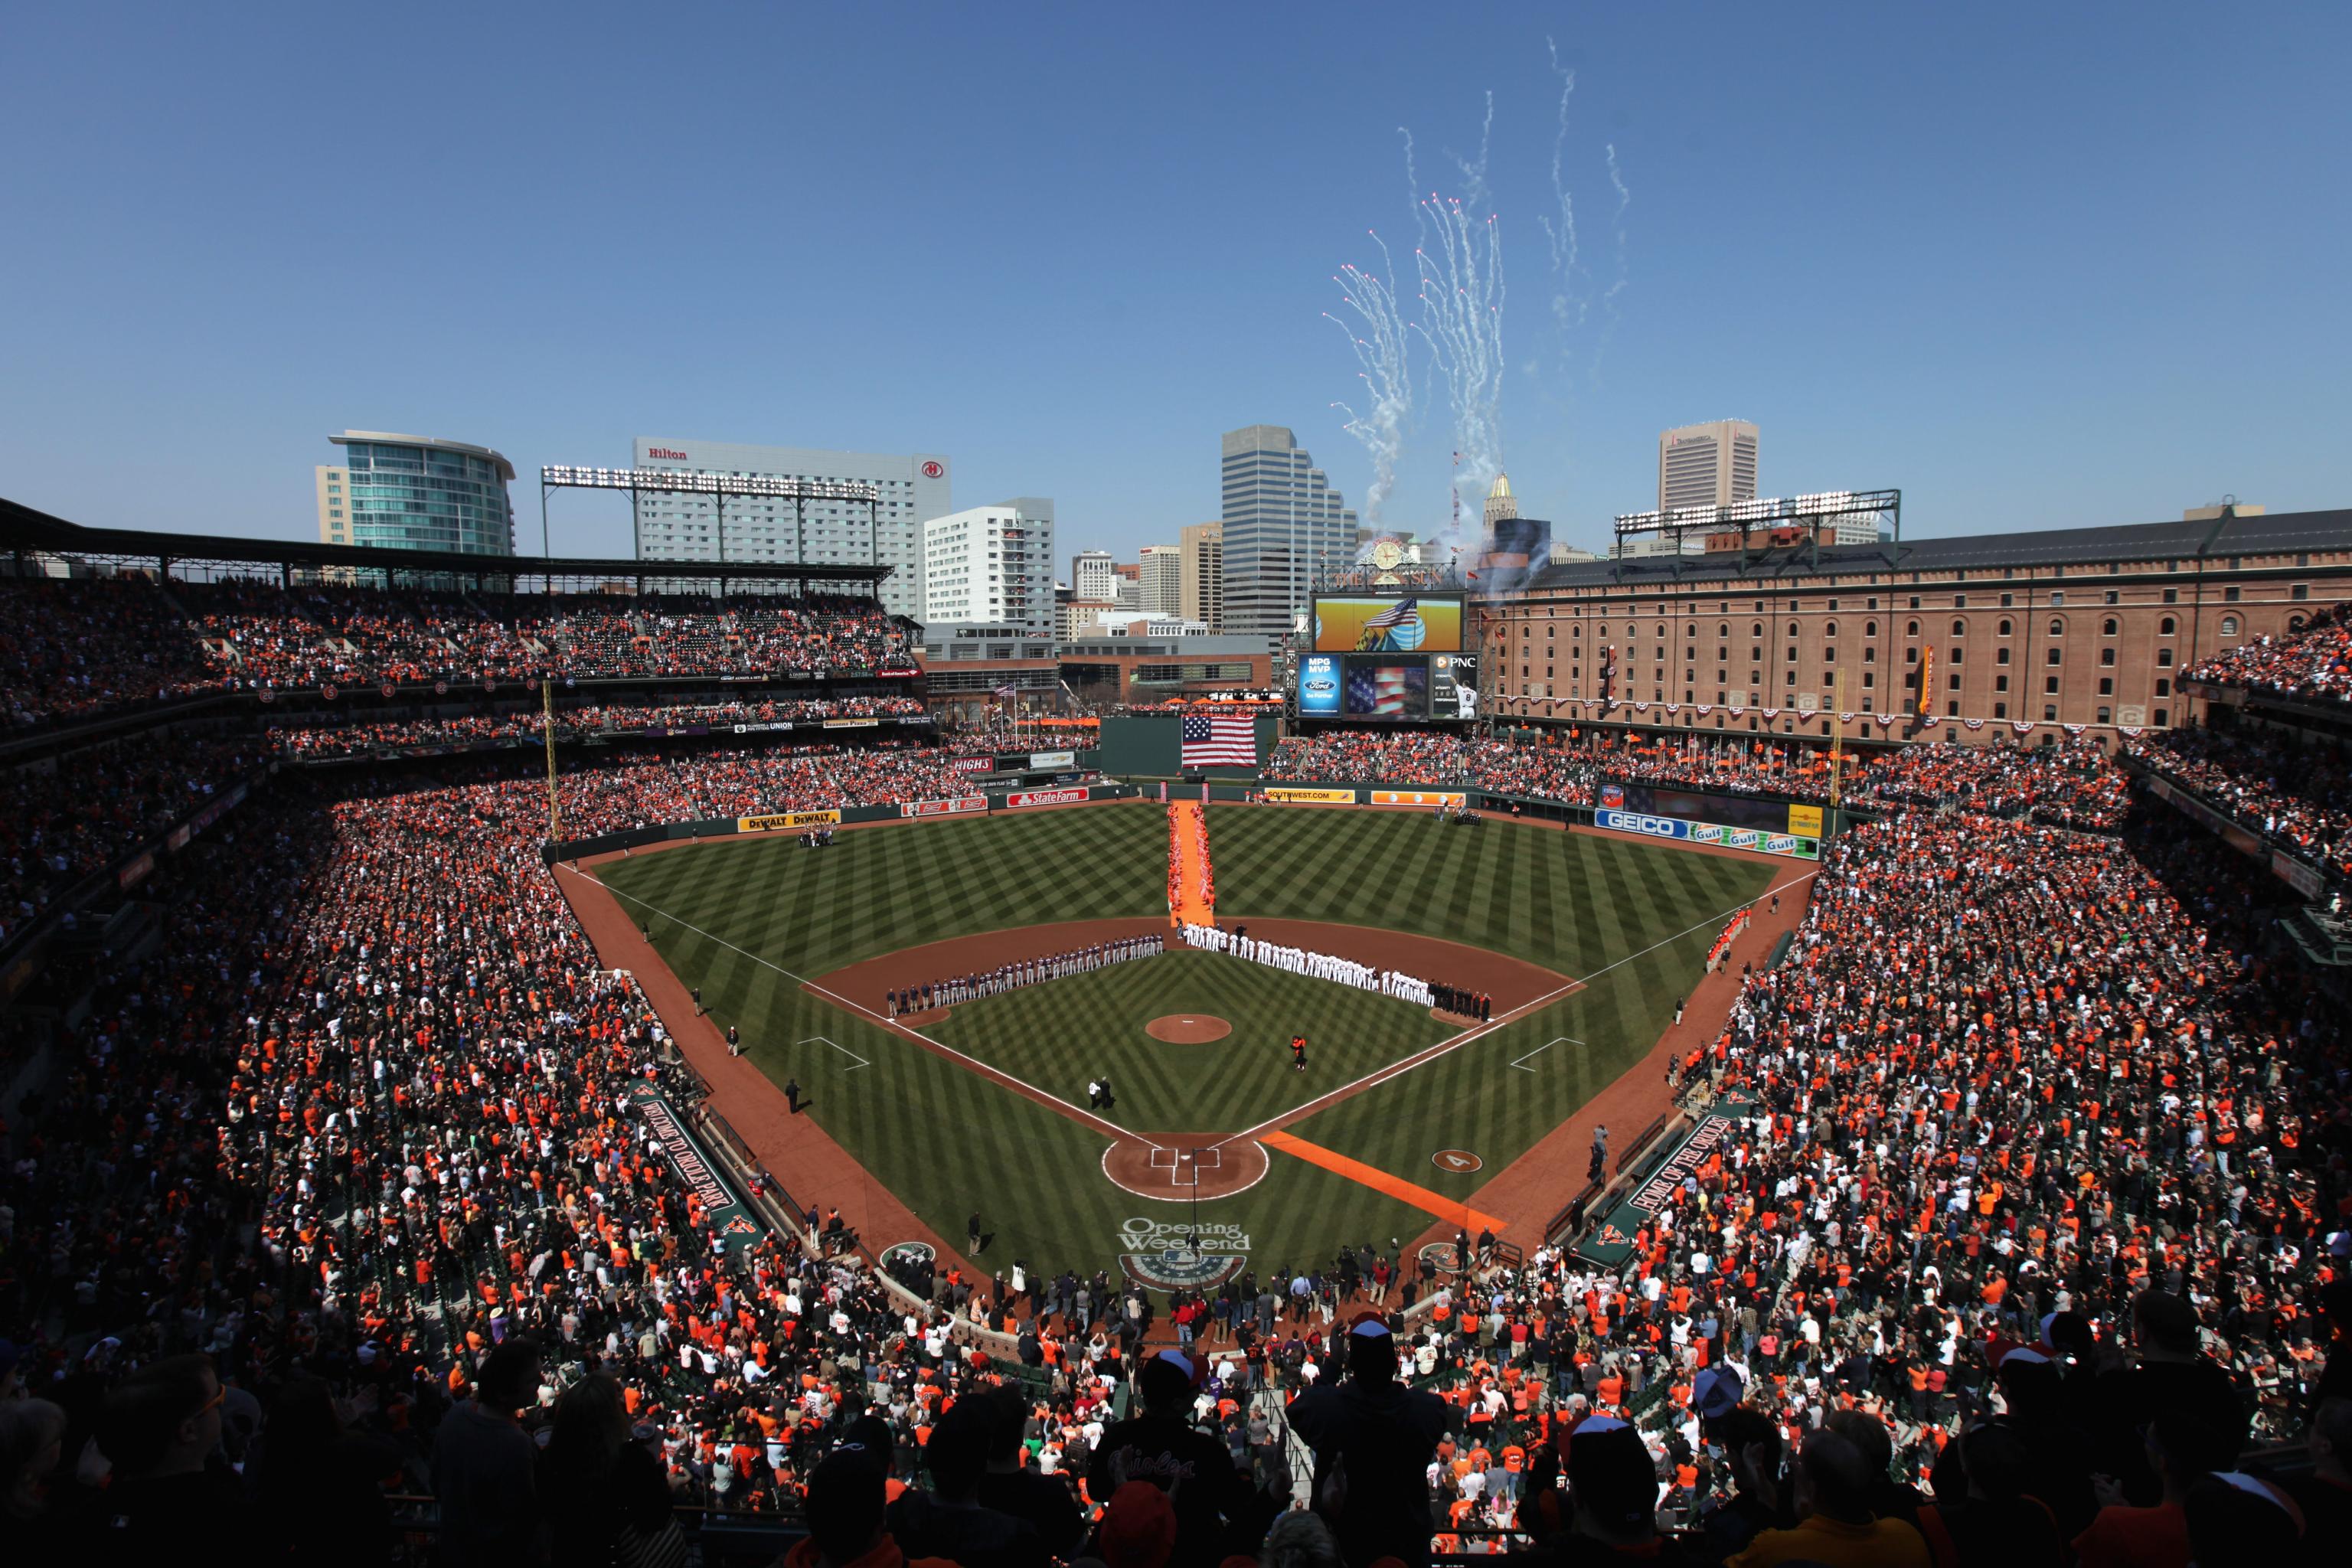 Photo Tour of the New Left Field at Oriole Park at Camden Yards